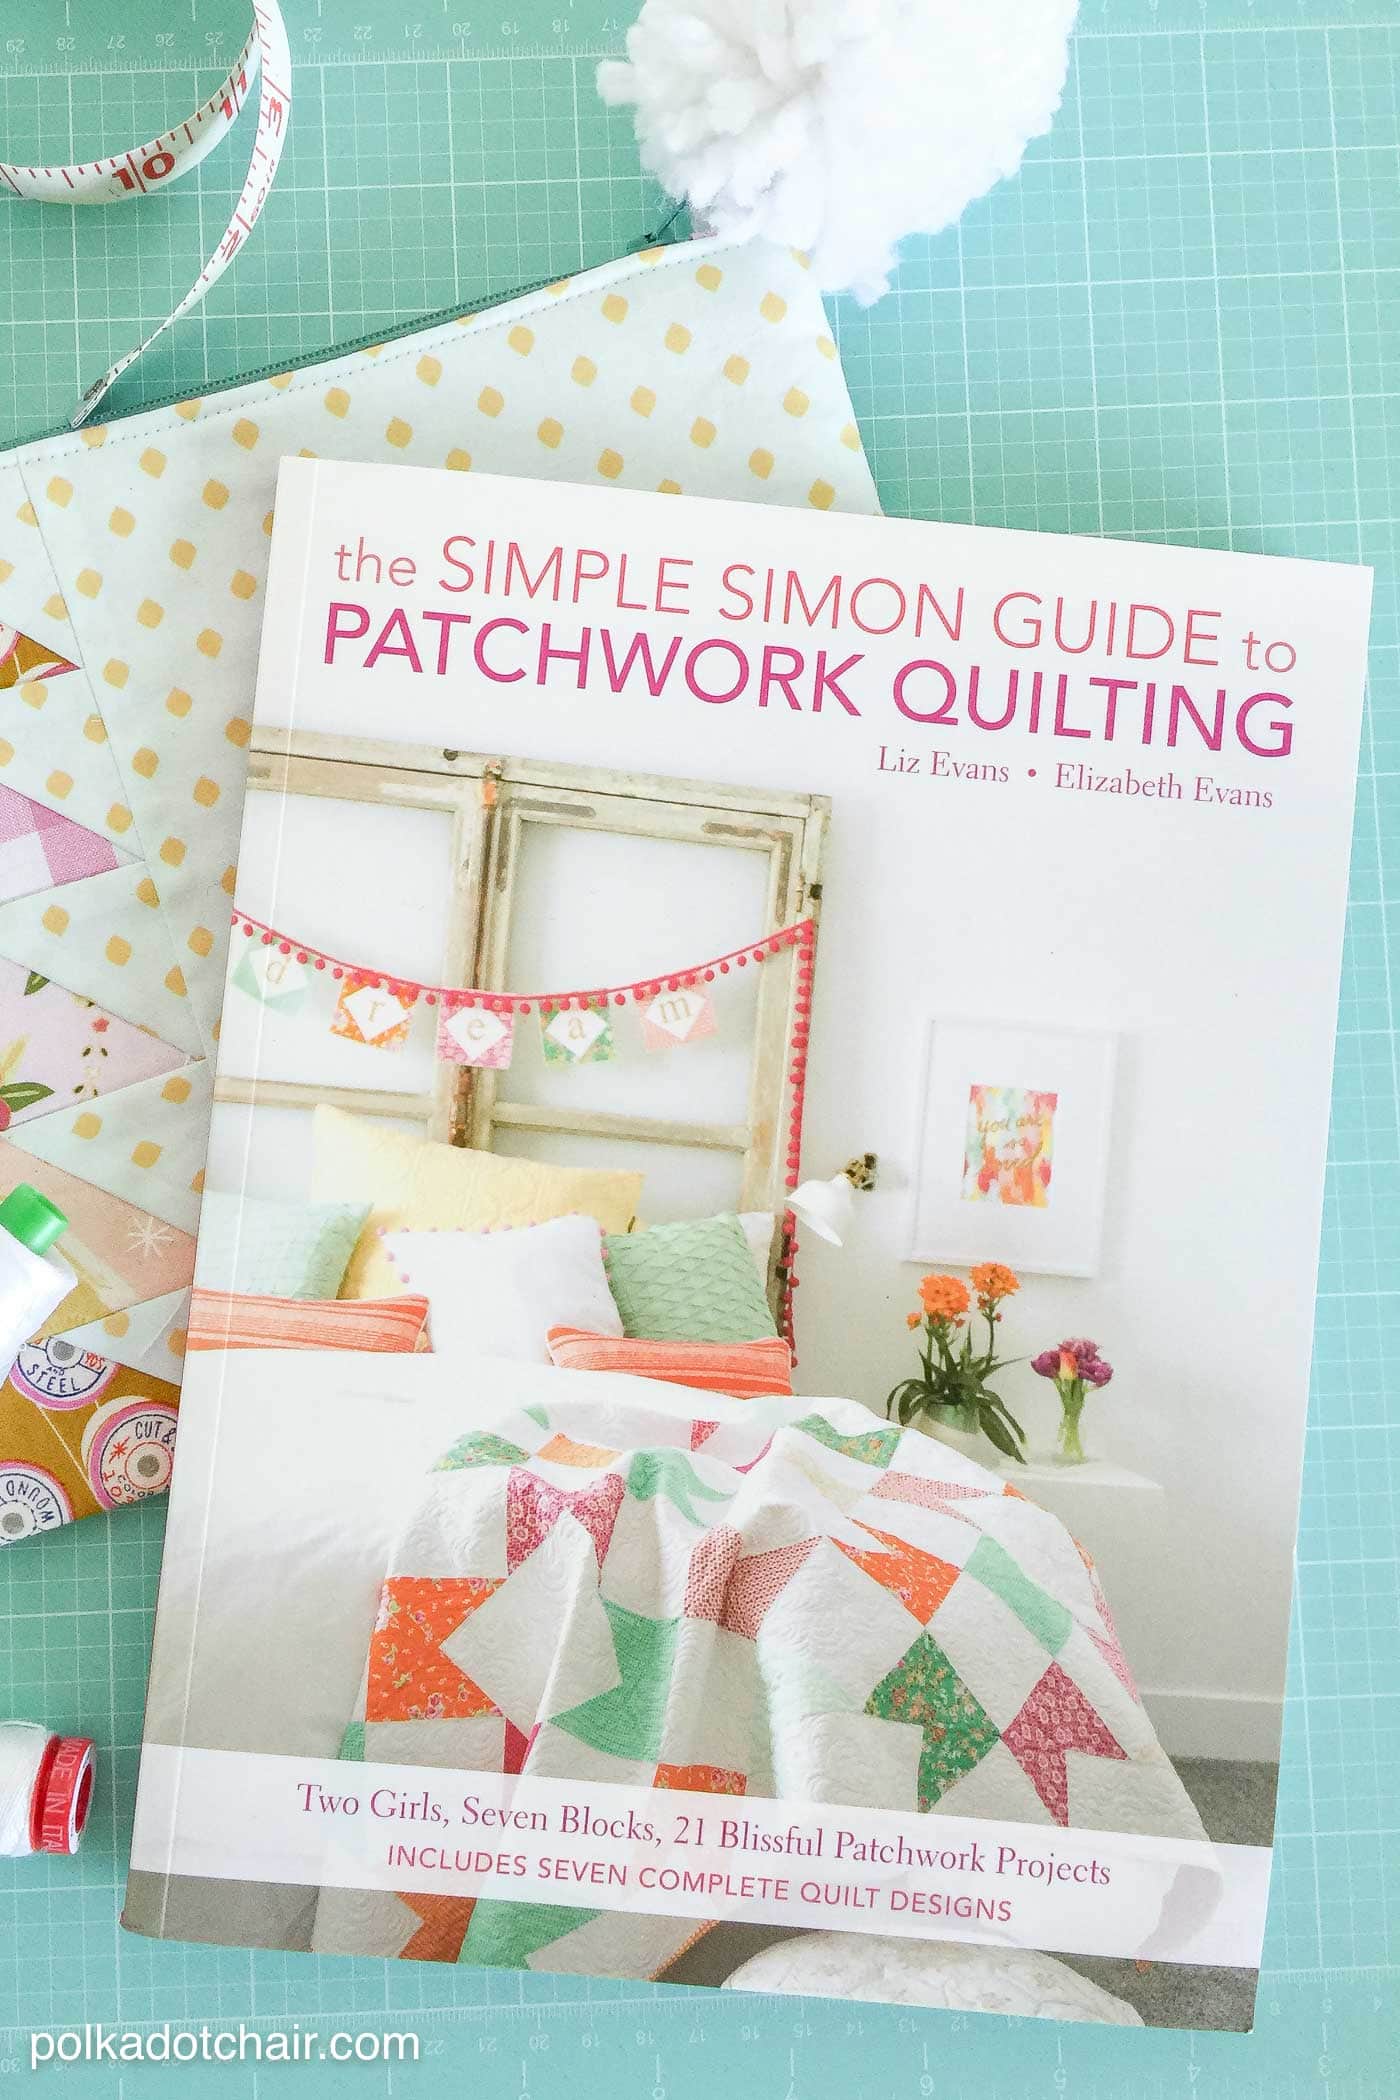 How to make a Flying Geese Zippered Pouch and a review of the Simple Simon Guide to Patchwork Quilting